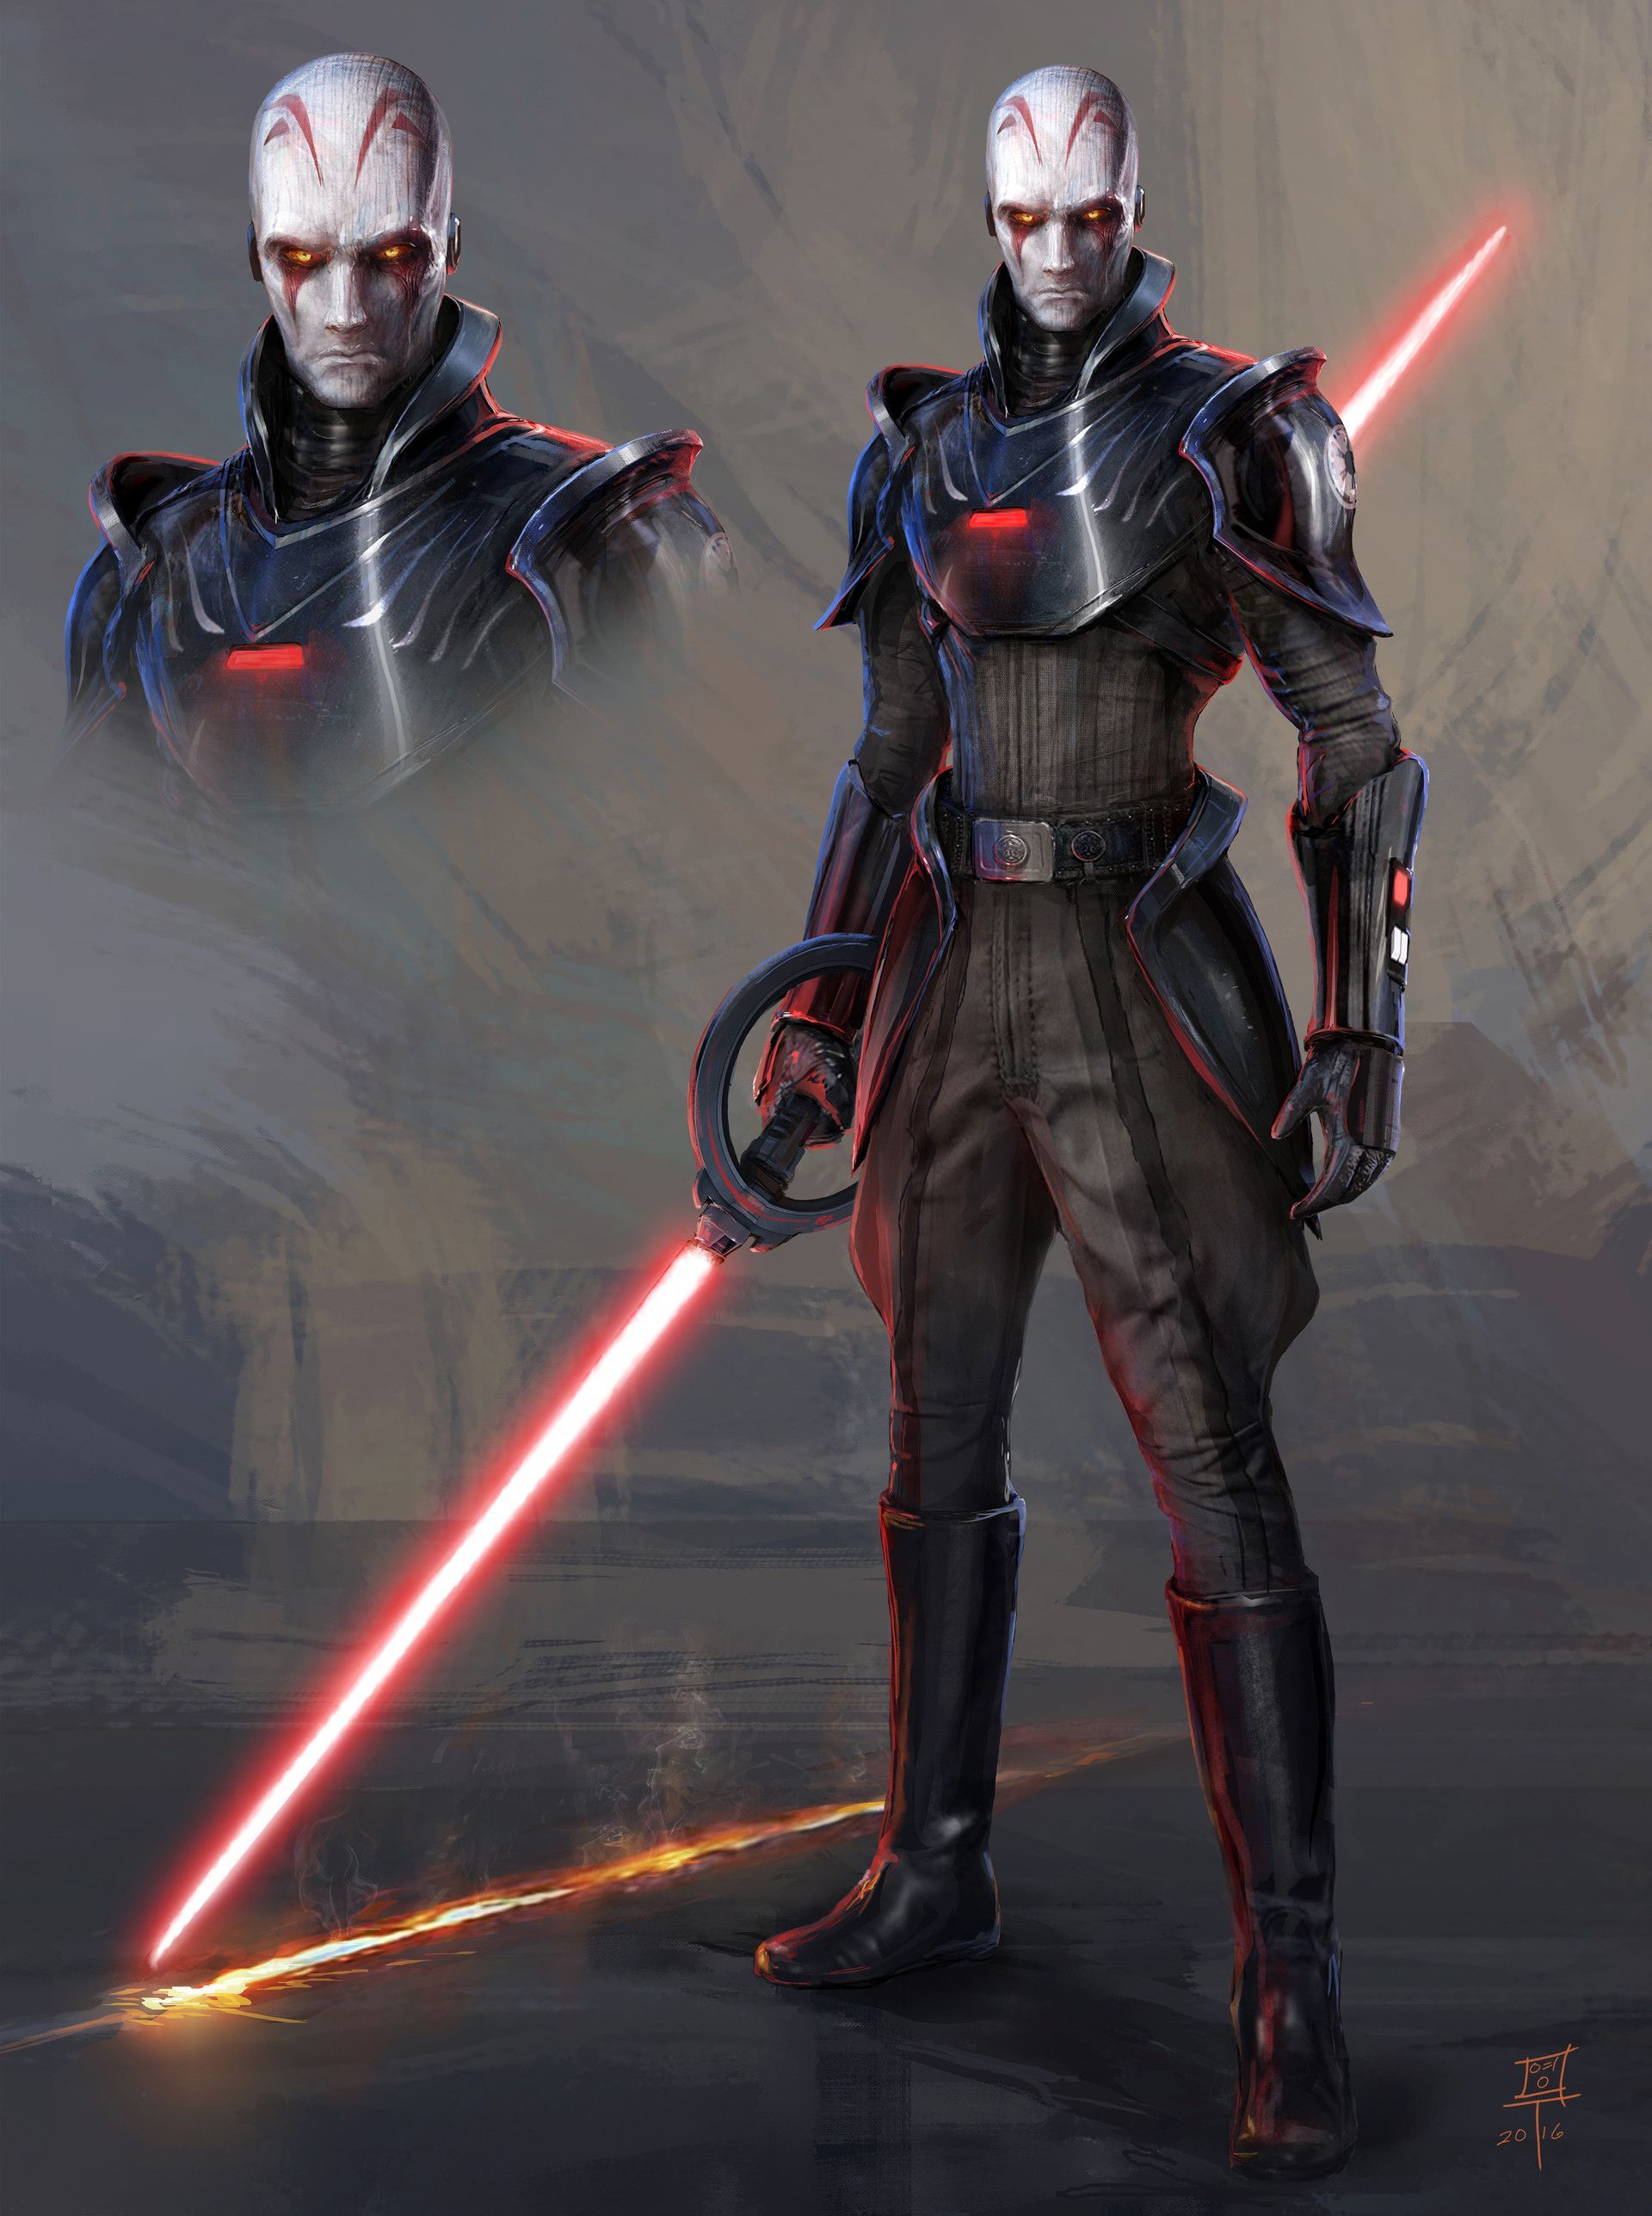 The Inquisitor (Rebels), MuYoung Kim. Star wars villains, Star wars characters picture, Dark side star wars